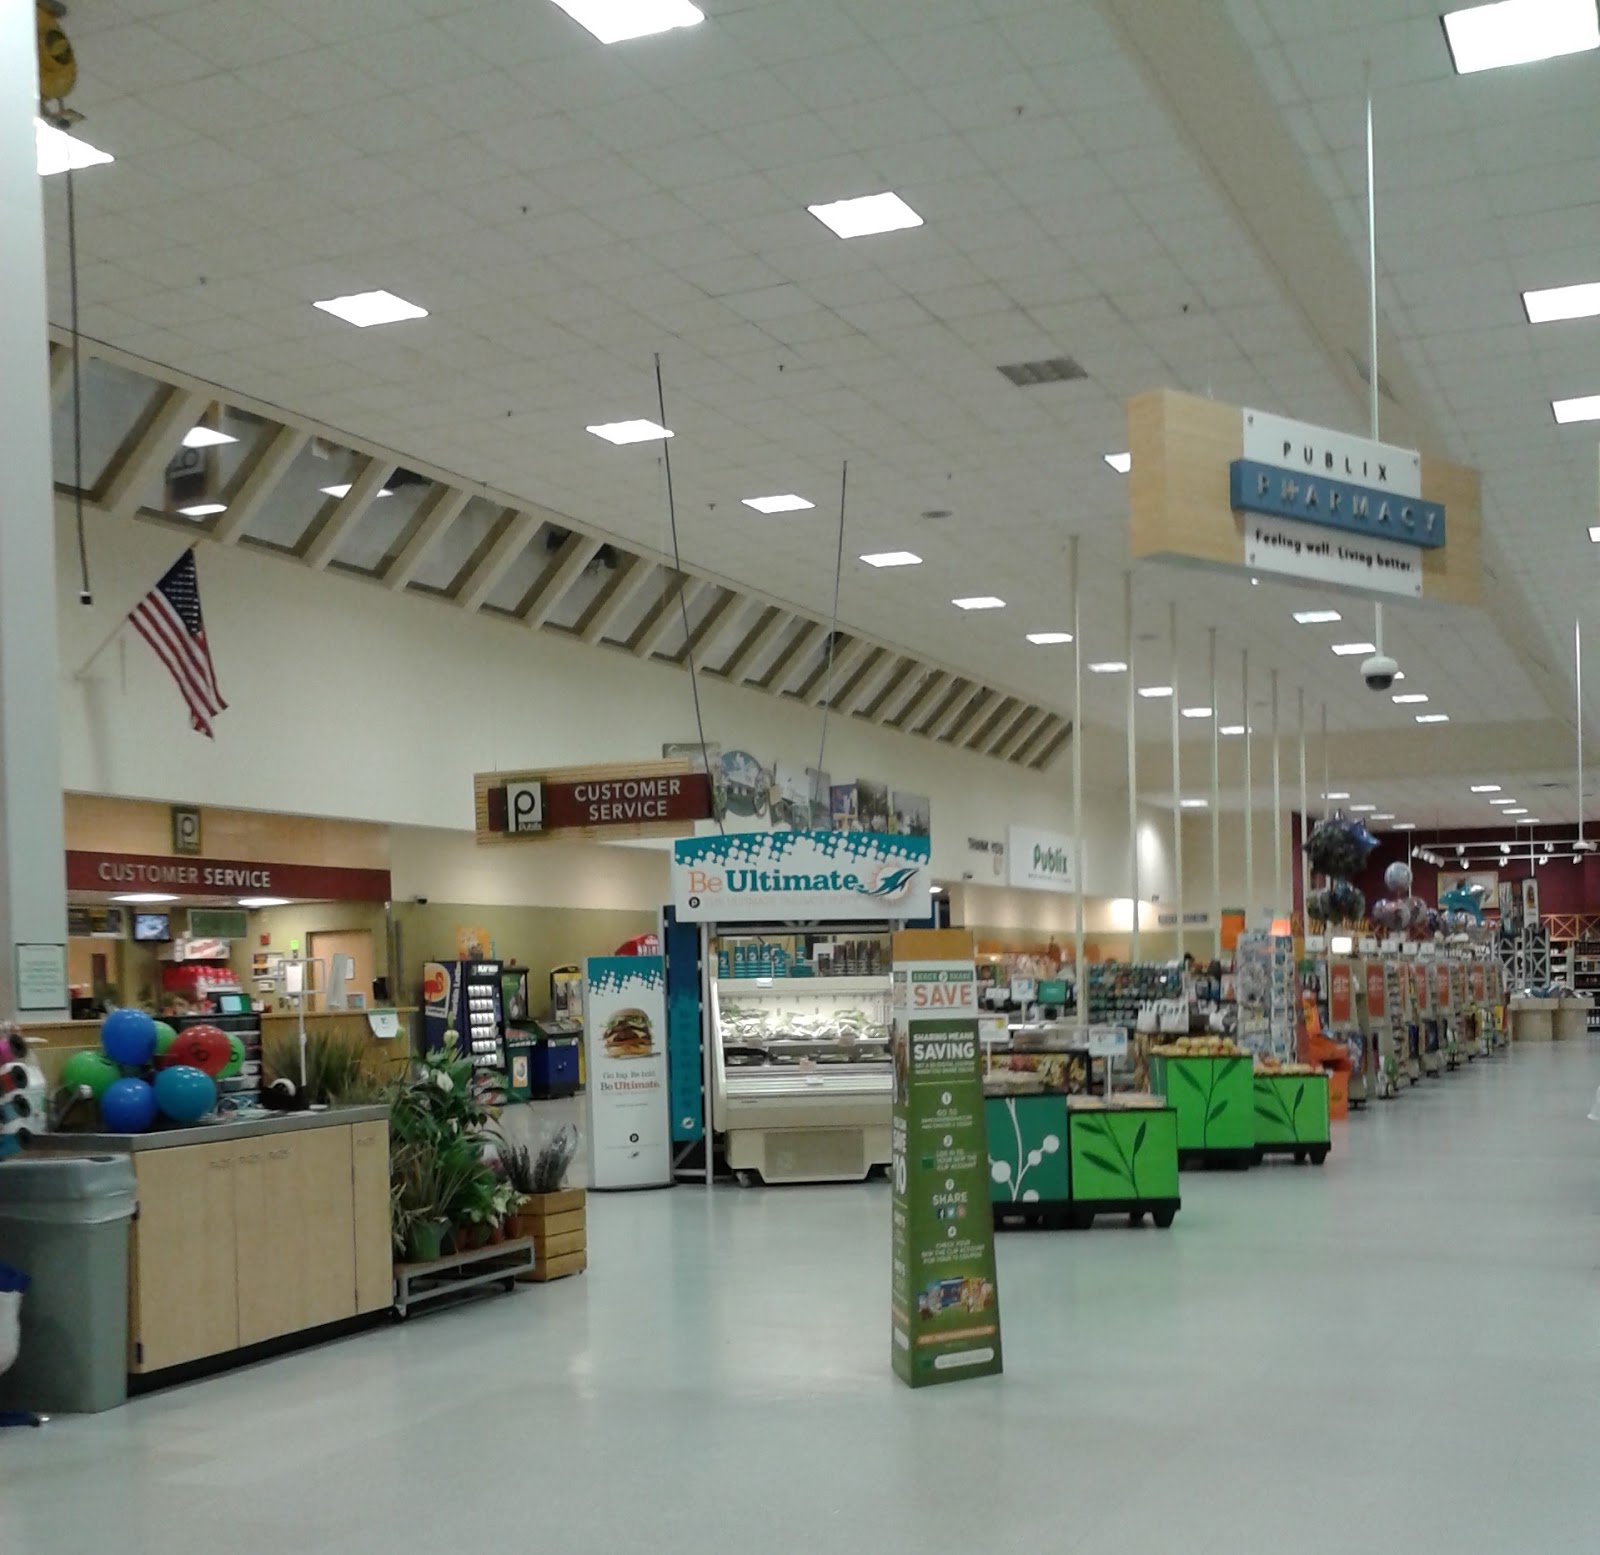 What kinds of services does Albertson's grocery store offer?